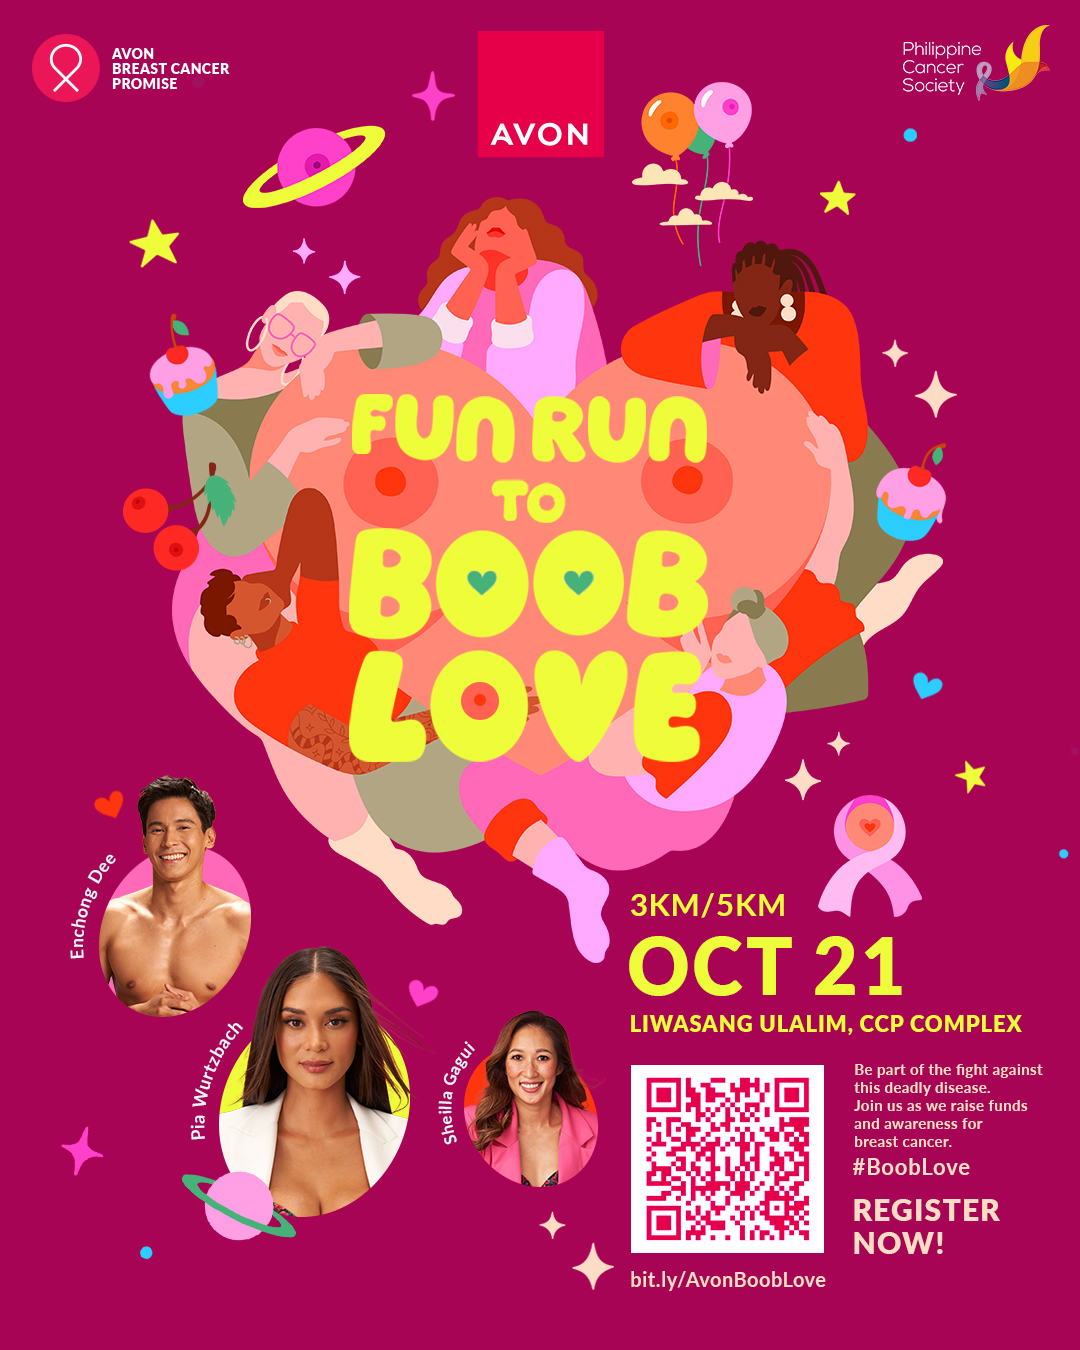 Oh, For The Love of Boobs: Join AVON's Fun Run for Breast Cancer Awareness Month